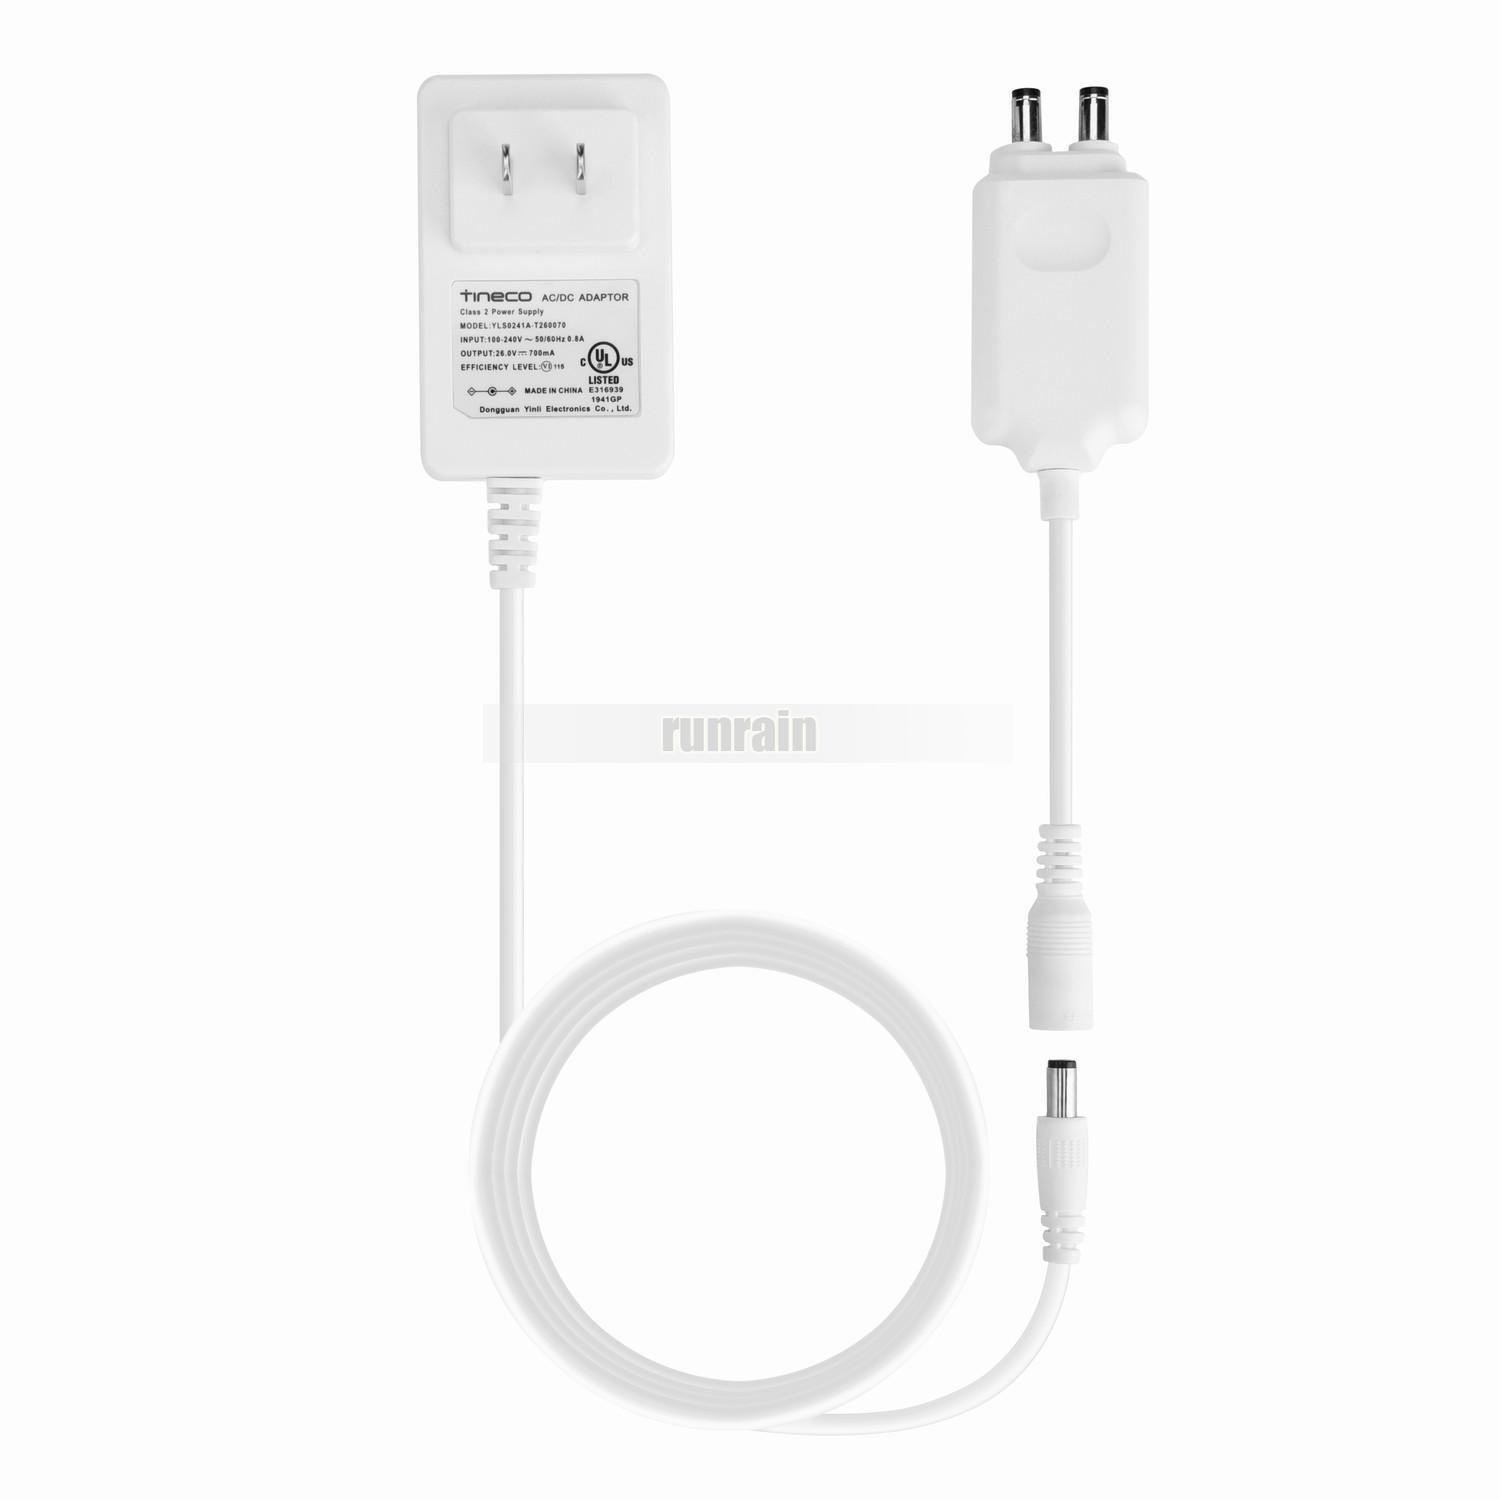 Tineco Pure One S12 S11 A11 Series Dual Charging Adapter 26V 700mA 0.7A Brand Tineco Color White Compatible Brand Tinec